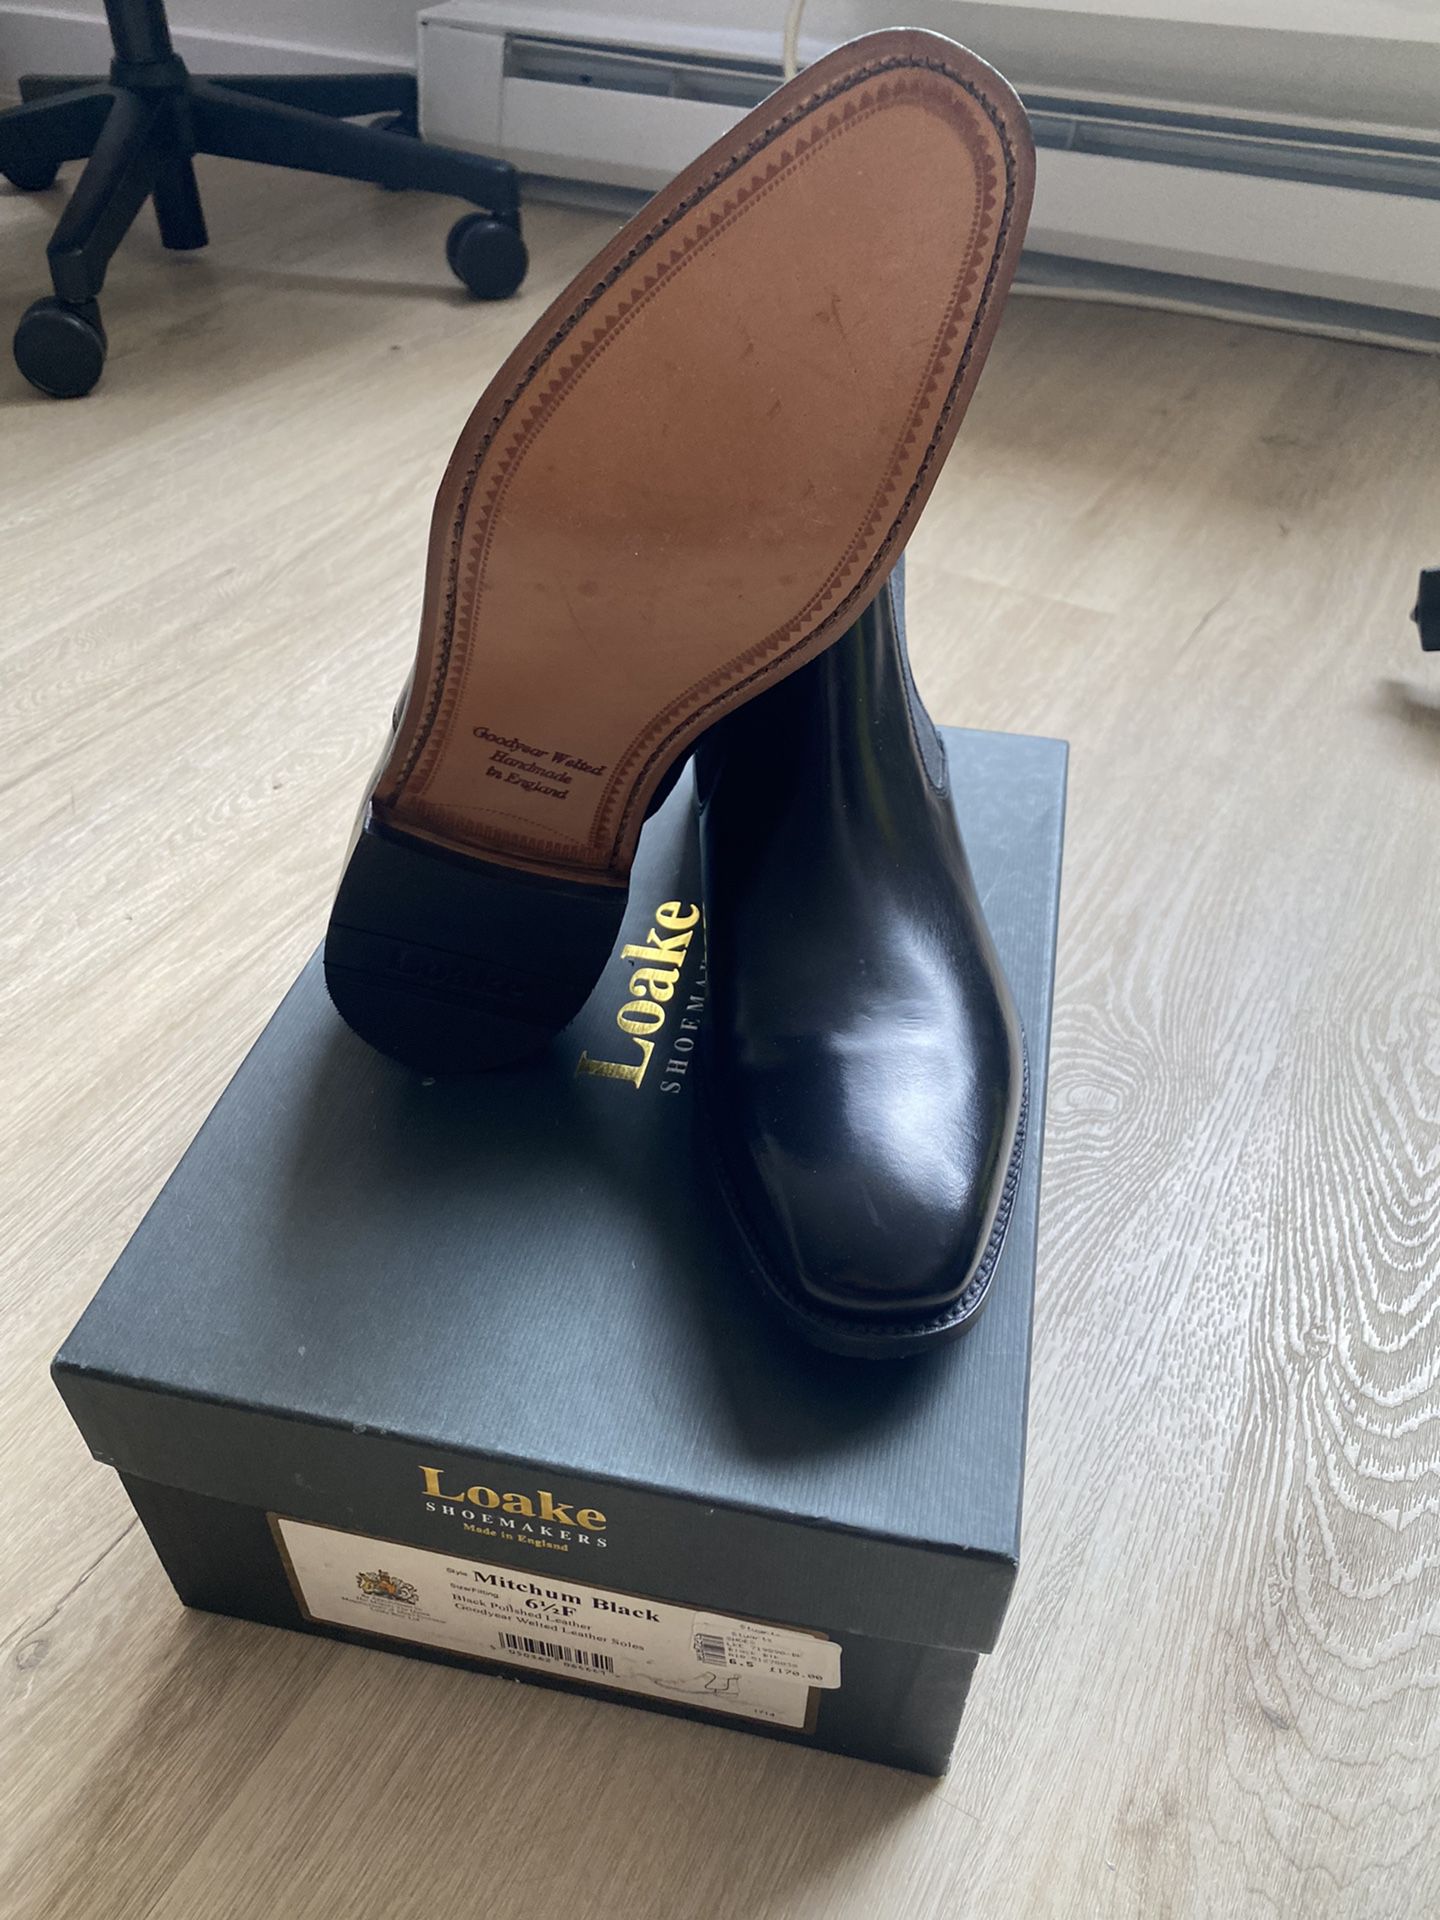 Loake Chelsea Black Boots Size 7.5 US for Sale in New York, NY -